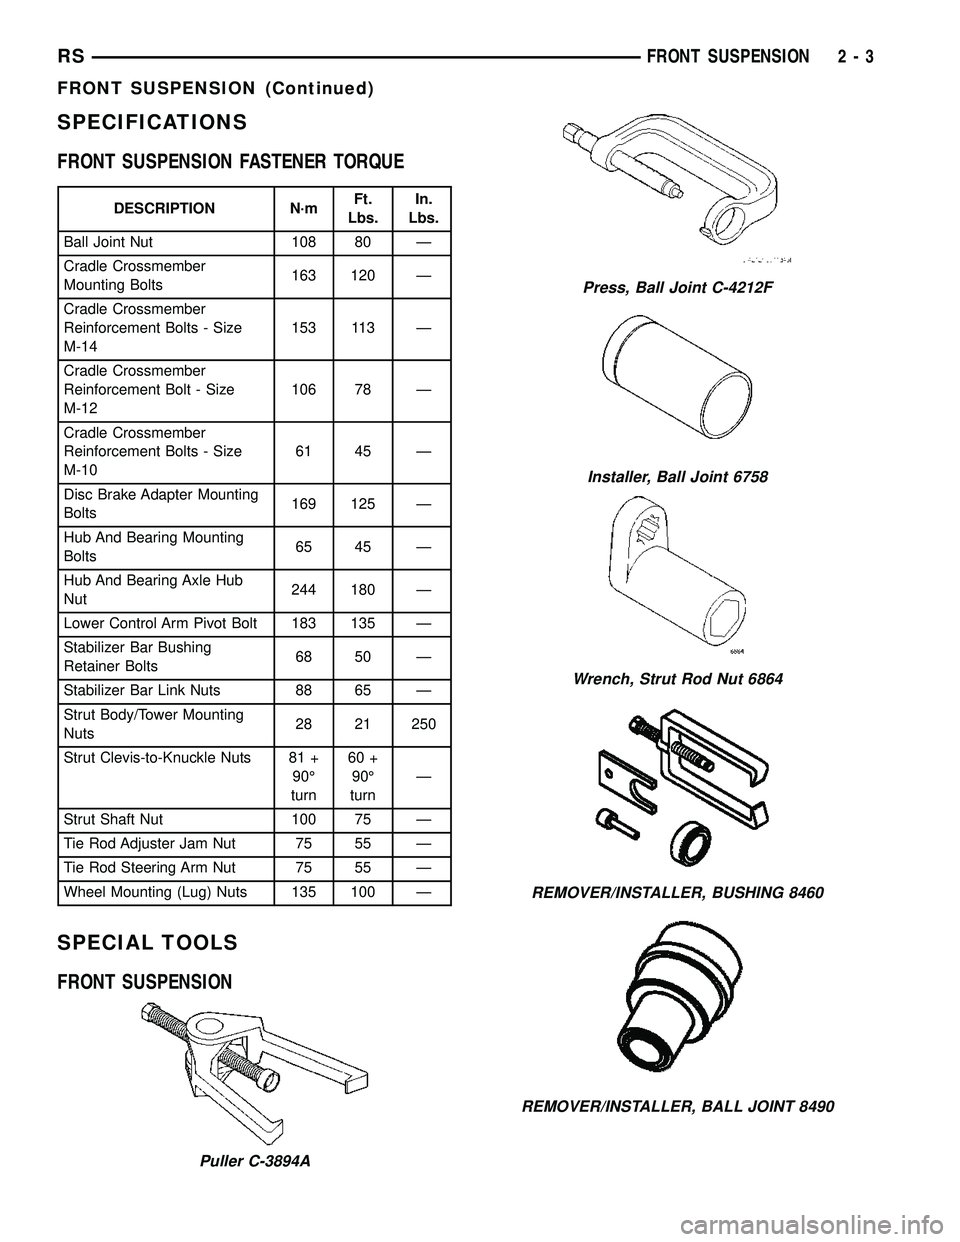 DODGE TOWN AND COUNTRY 2004  Service Manual SPECIFICATIONS
FRONT SUSPENSION FASTENER TORQUE
DESCRIPTION N´mFt.
Lbs.In.
Lbs.
Ball Joint Nut 108 80 Ð
Cradle Crossmember
Mounting Bolts163 120 Ð
Cradle Crossmember
Reinforcement Bolts - Size
M-14